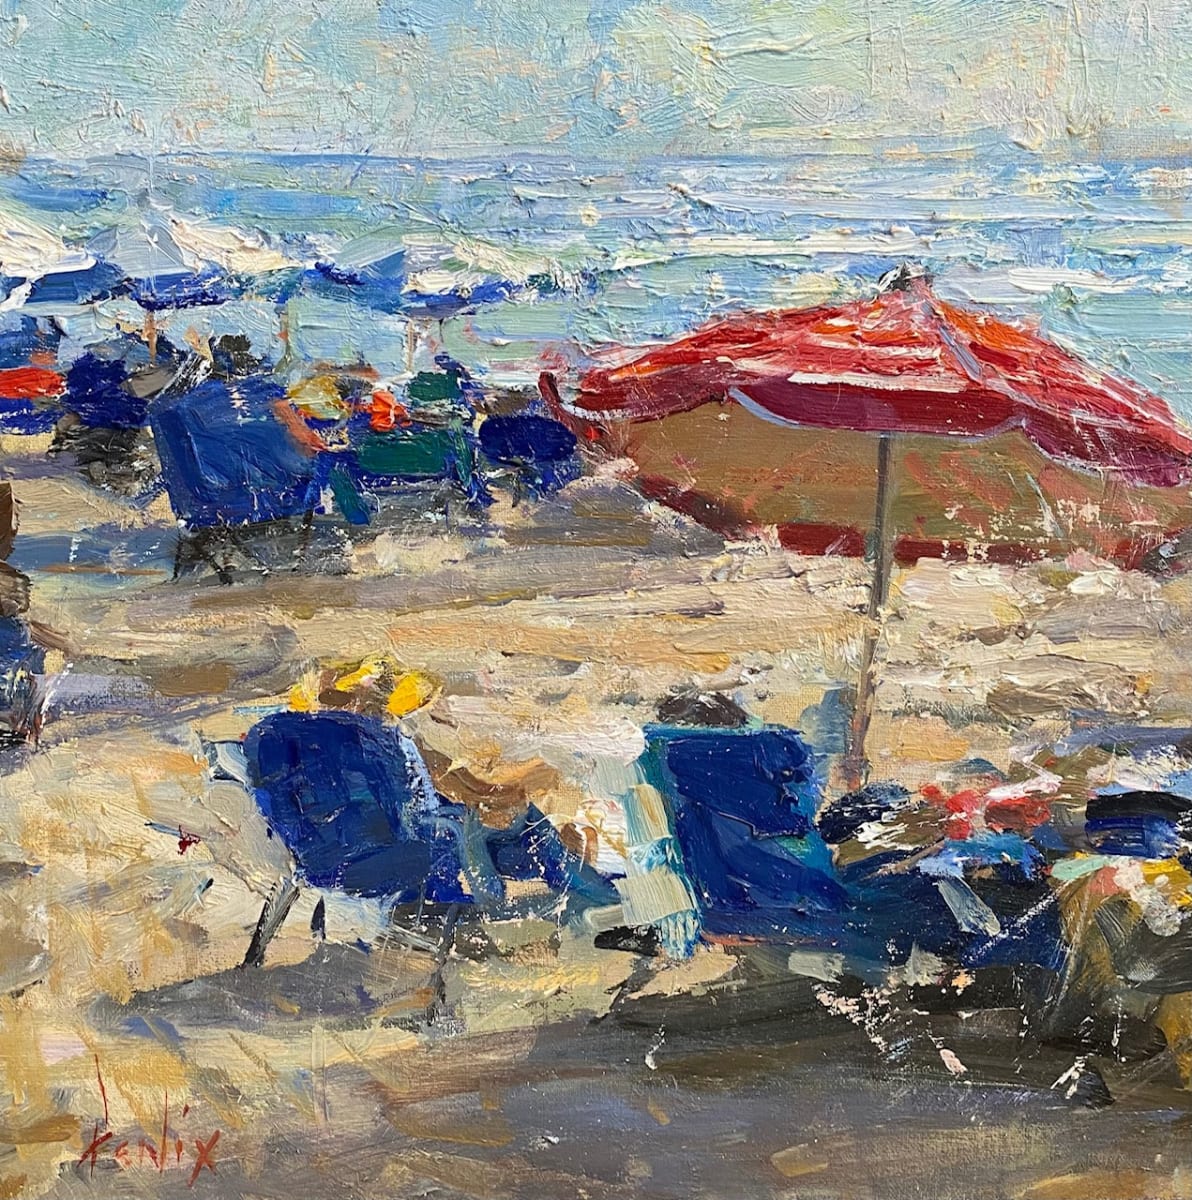 Umbrellas by the Sea by Derek Penix  Image: Study of the Beach